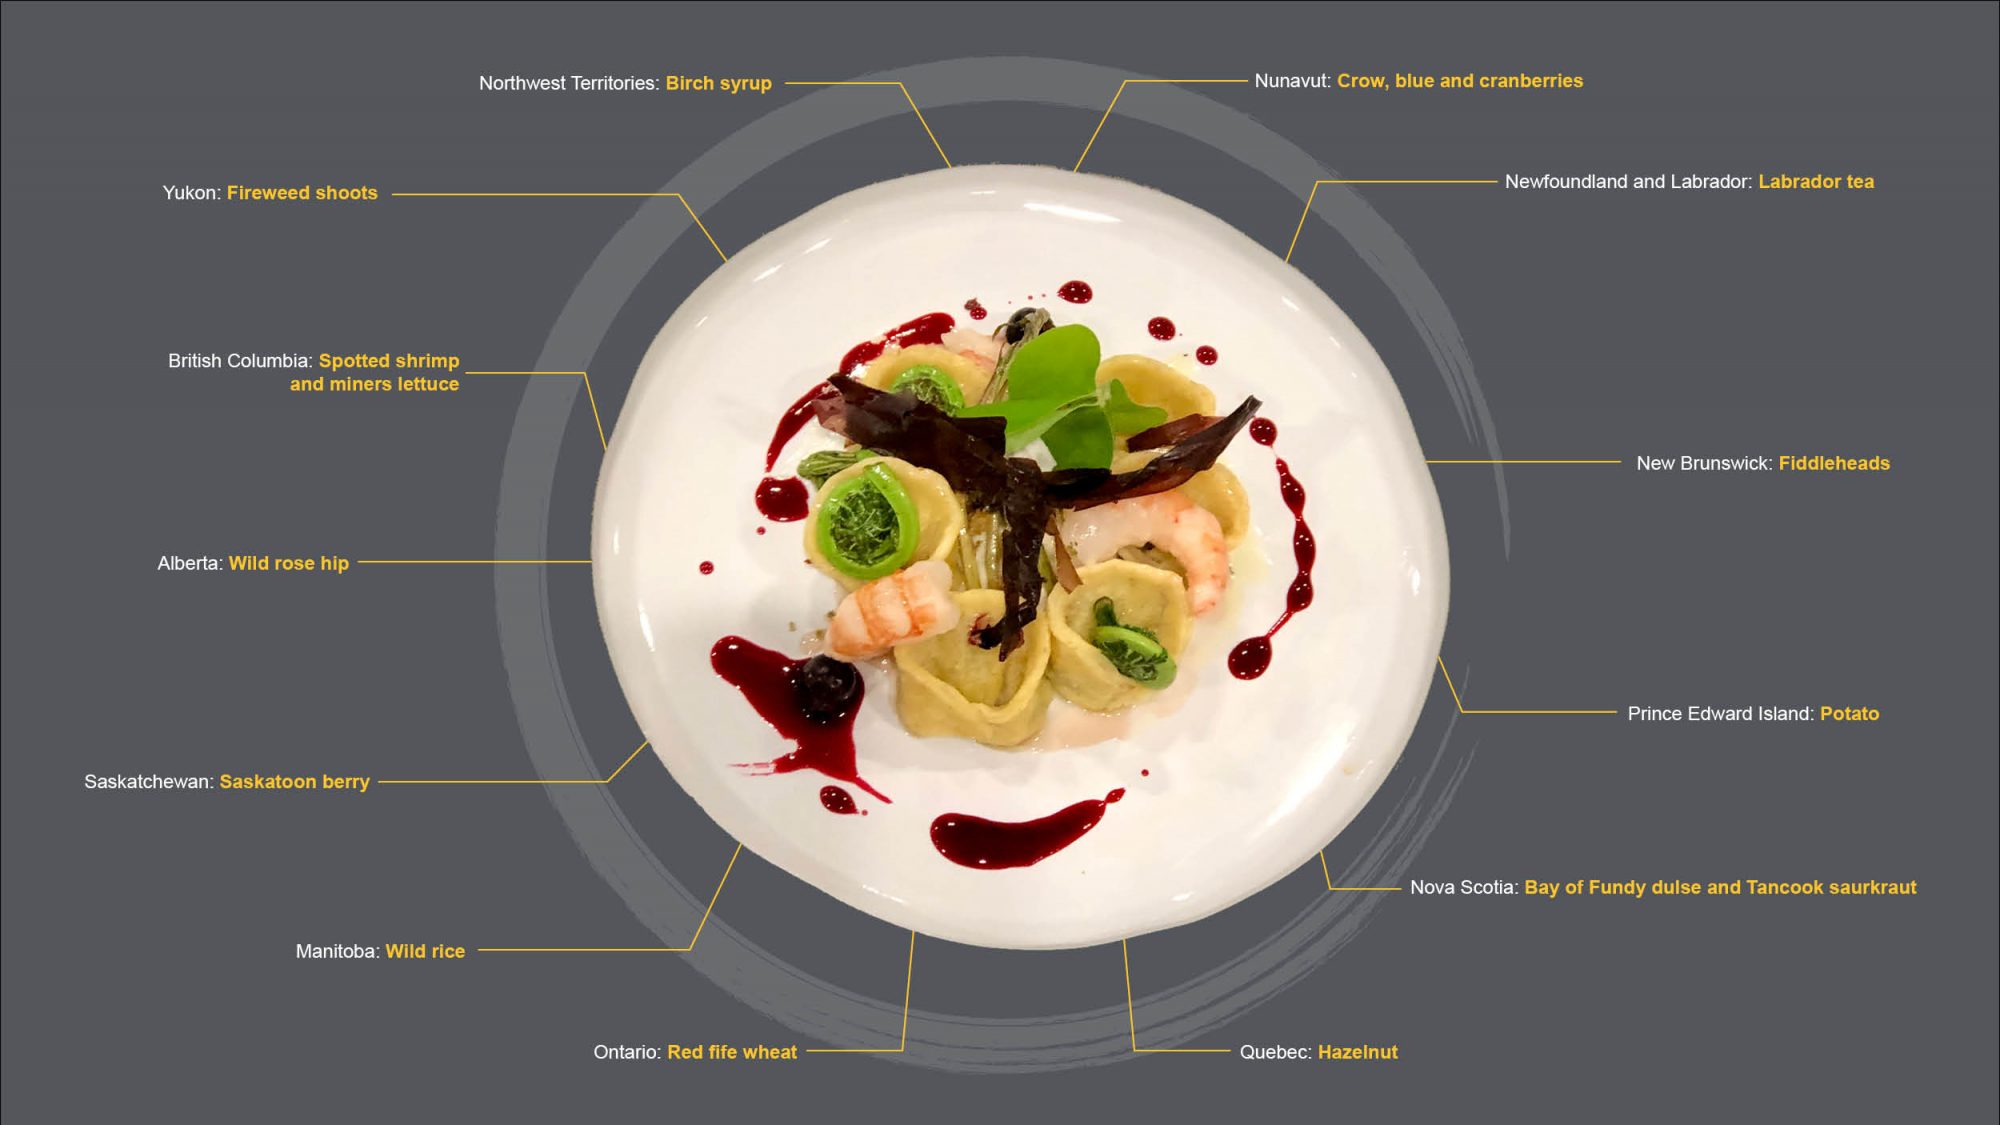 A diagram including an image Chef Andrea's plate, with text references to each ingredient and where they are from. Ingredient details listed in the caption.